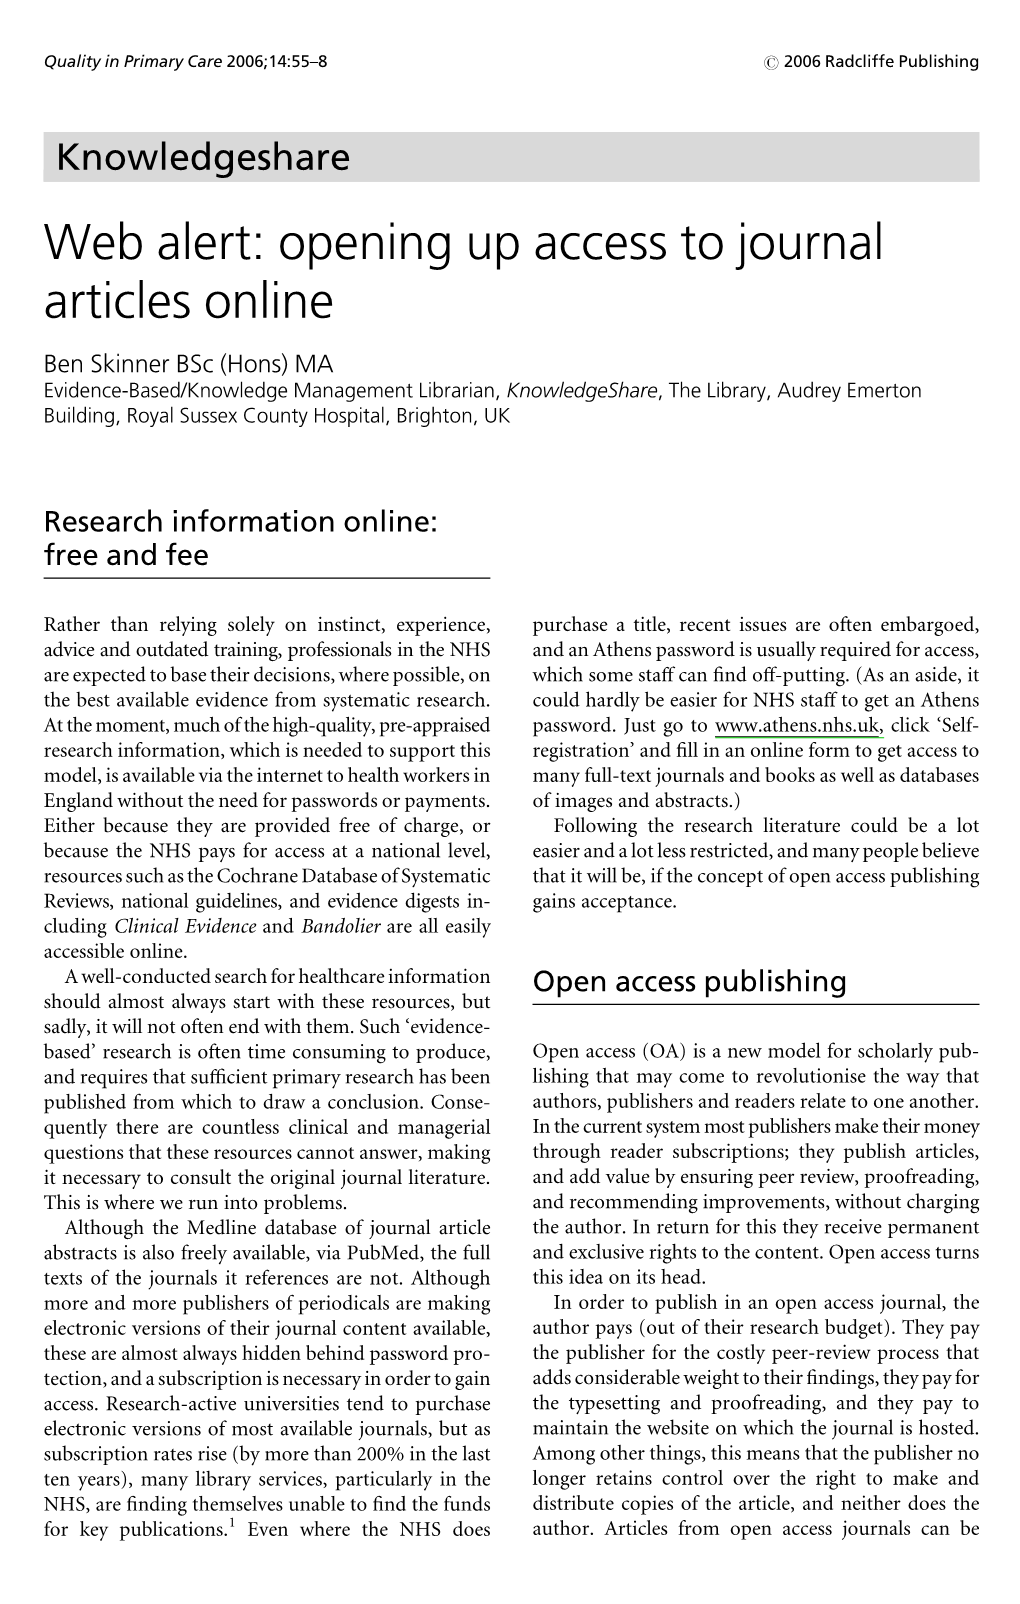 Web Alert: Opening up Access to Journal Articles Online